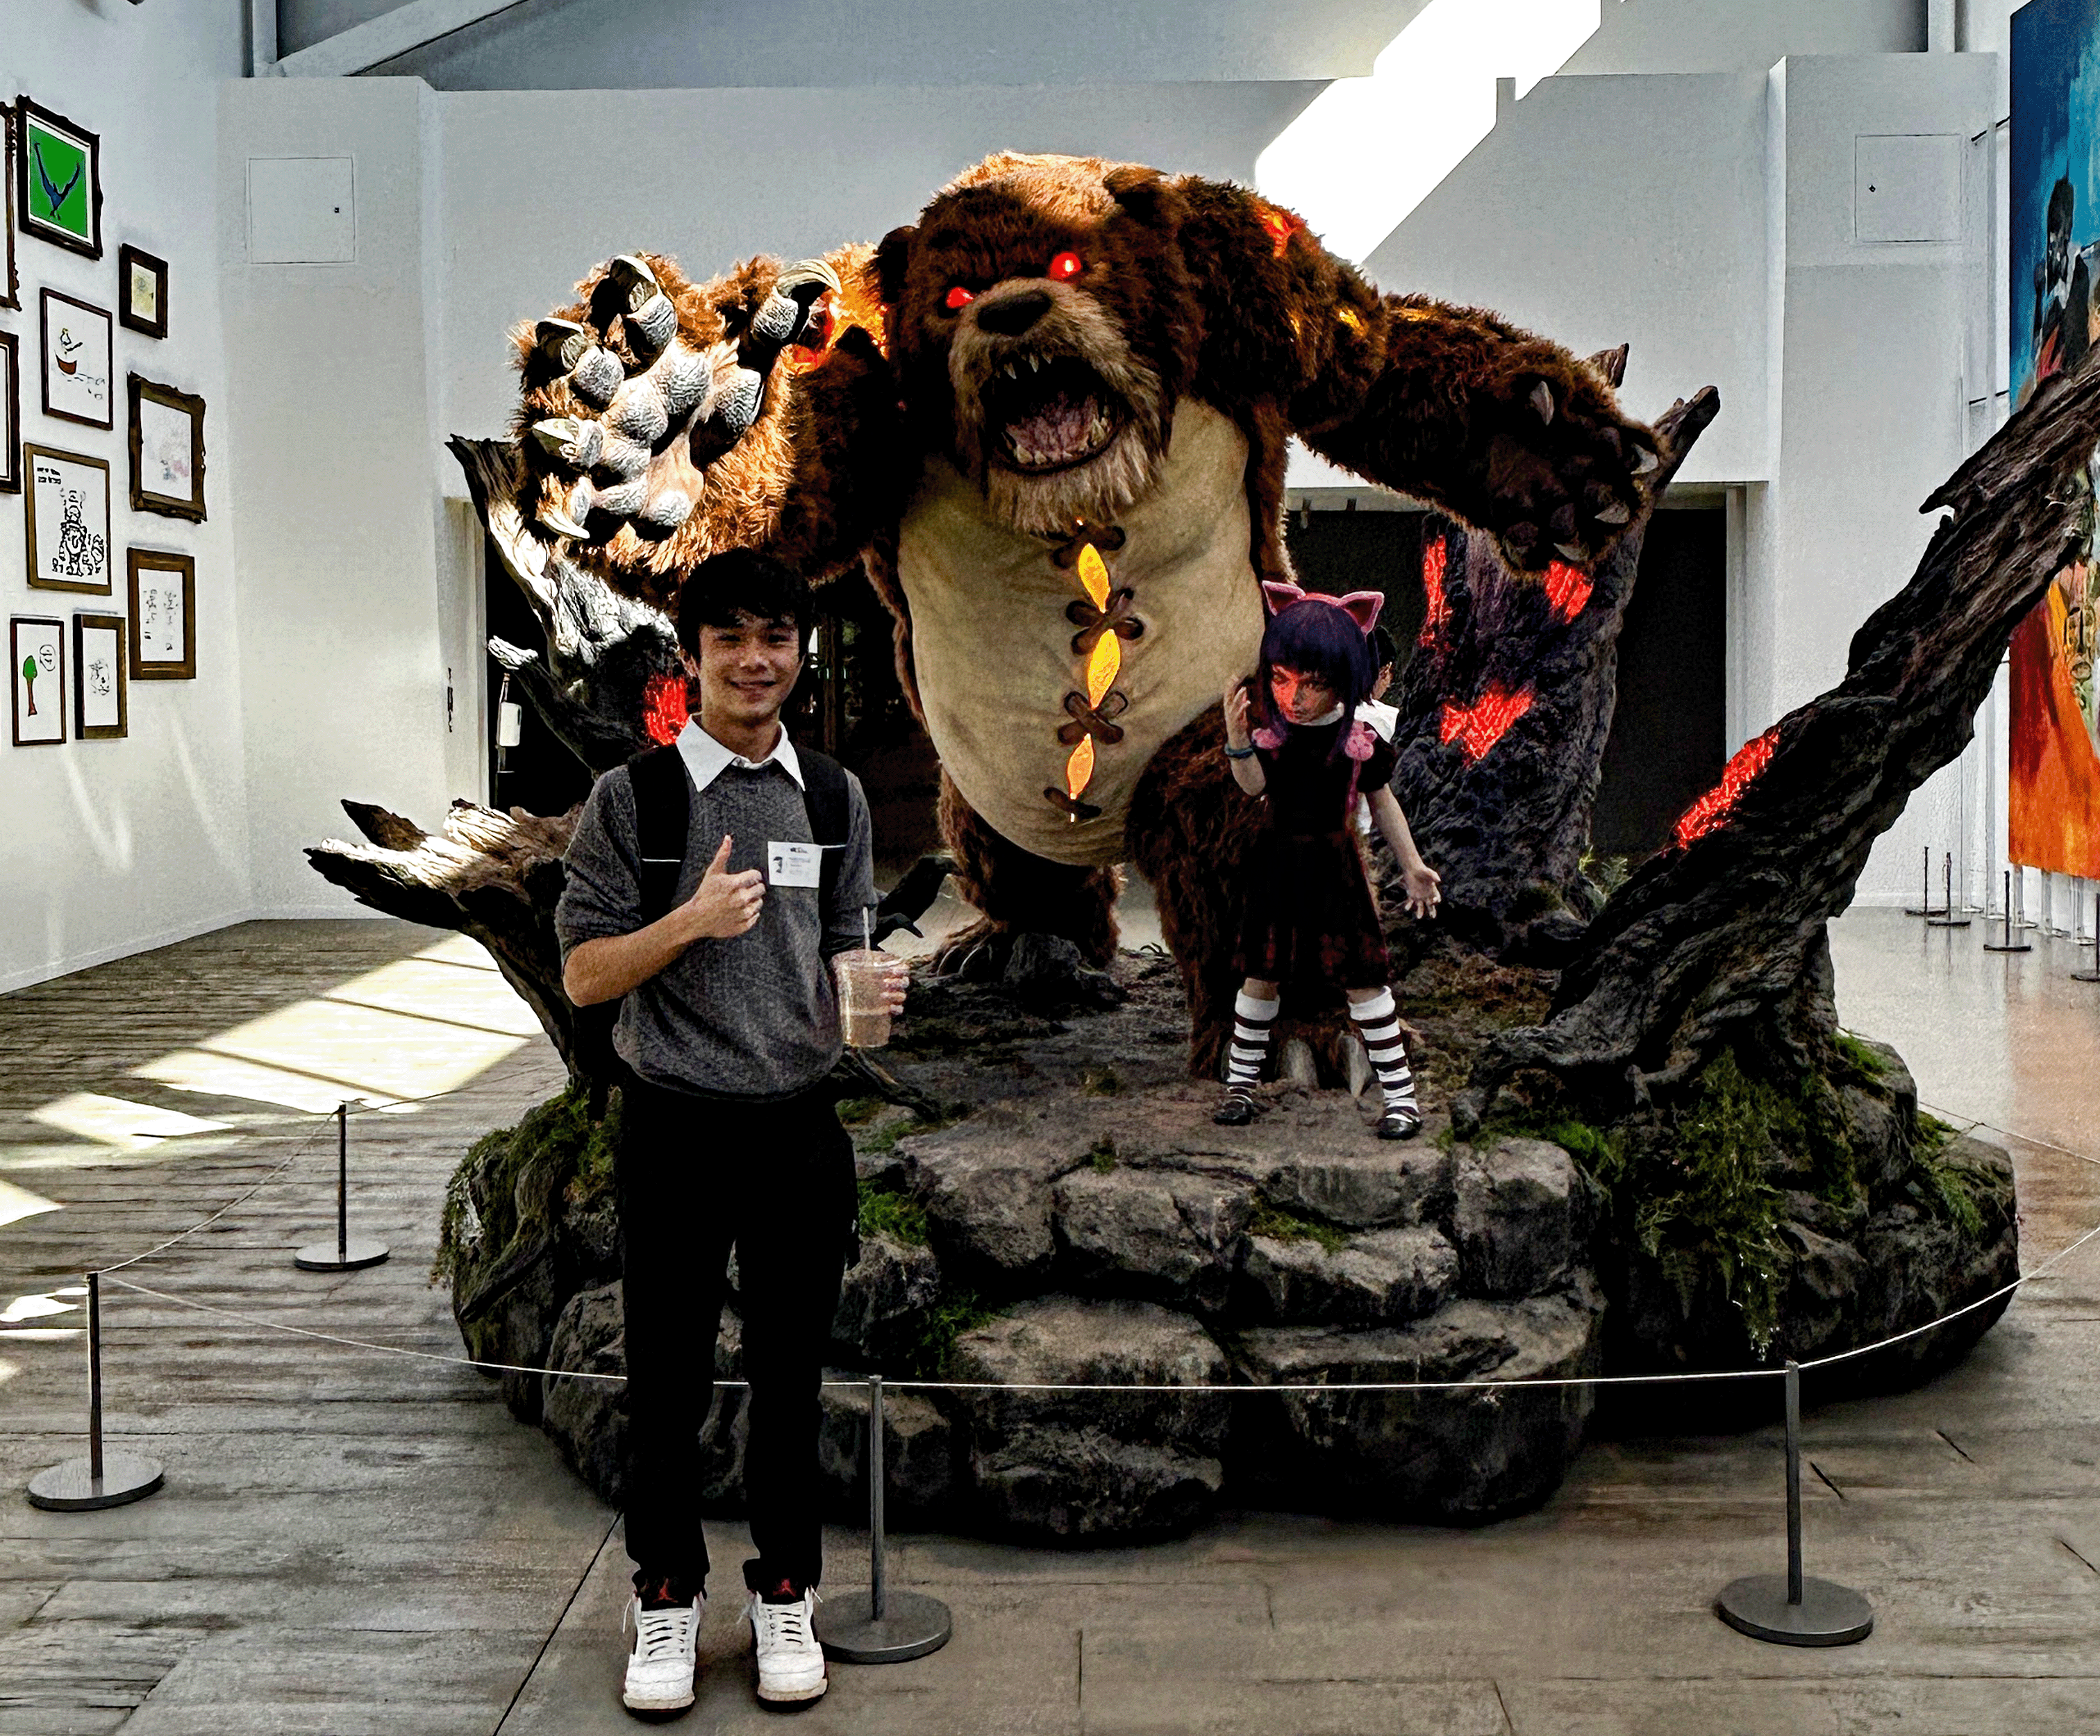 a picture of me with black pants and gray sweater standing next to a bear statue